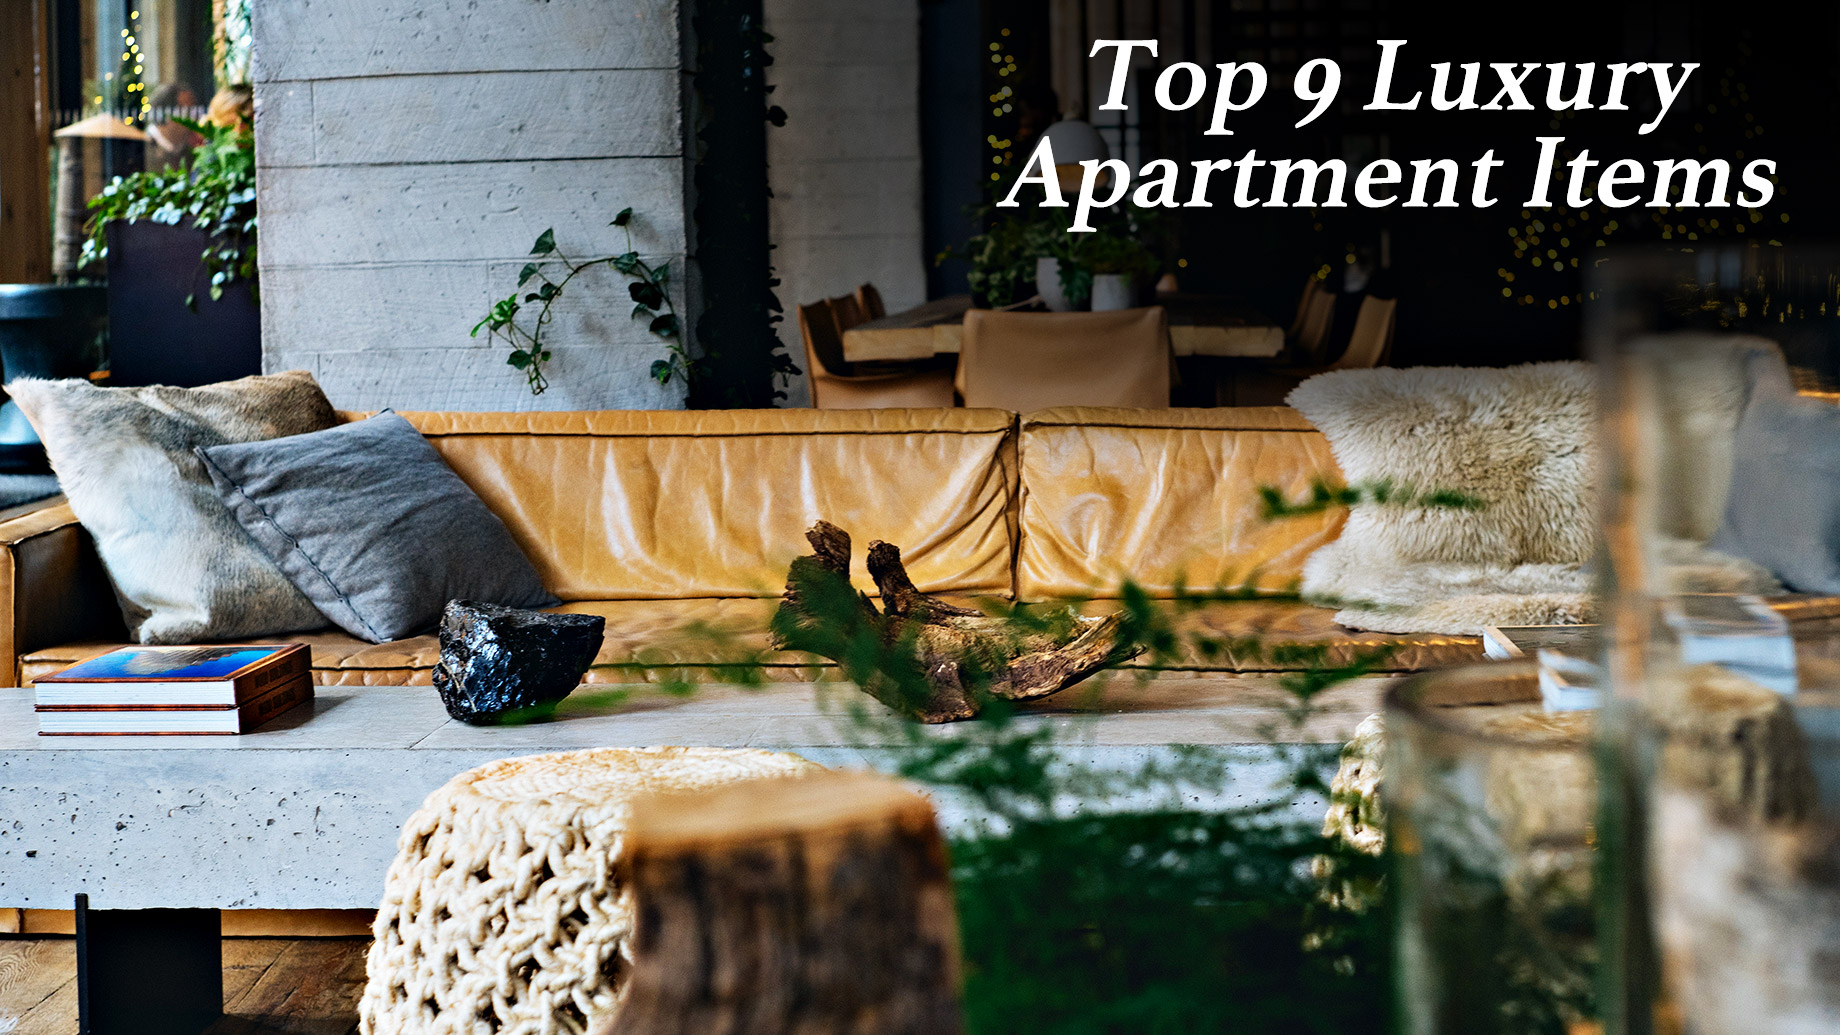 The Top 9 Luxury Apartment Items That Anyone Can Have